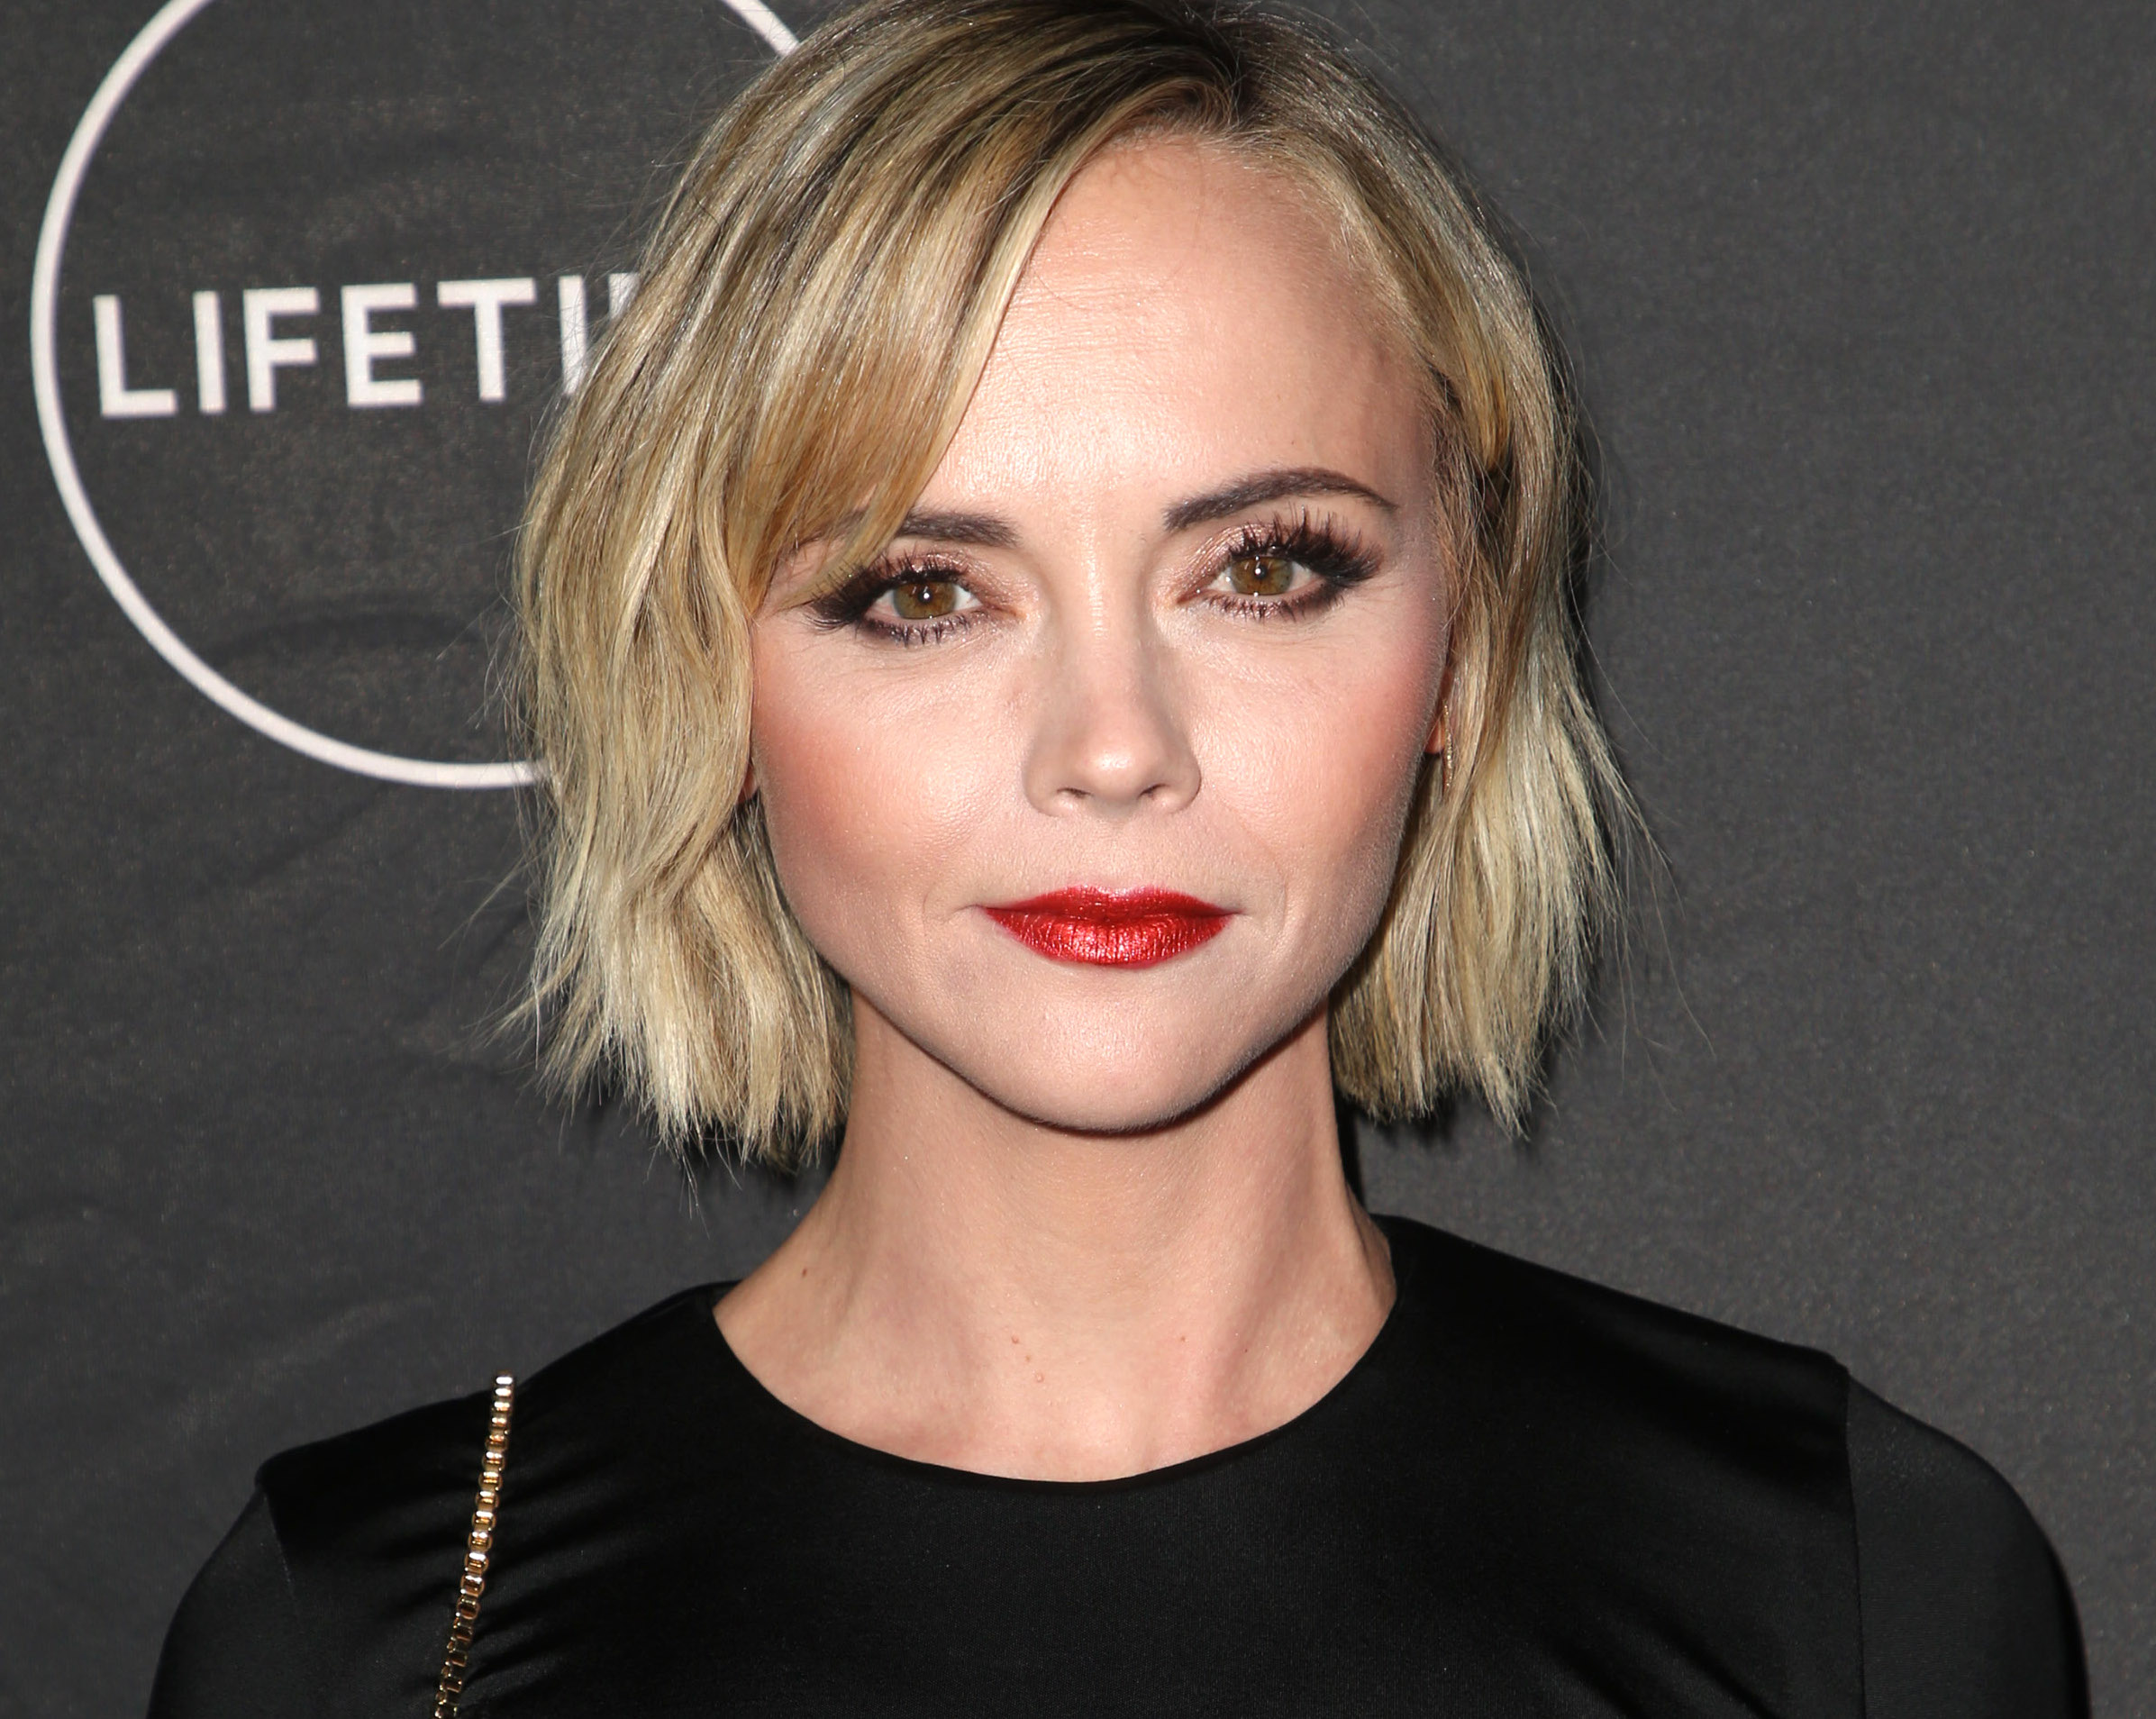 Christina Ricci Wiki, Bio, Age, Net Worth, and Other Facts